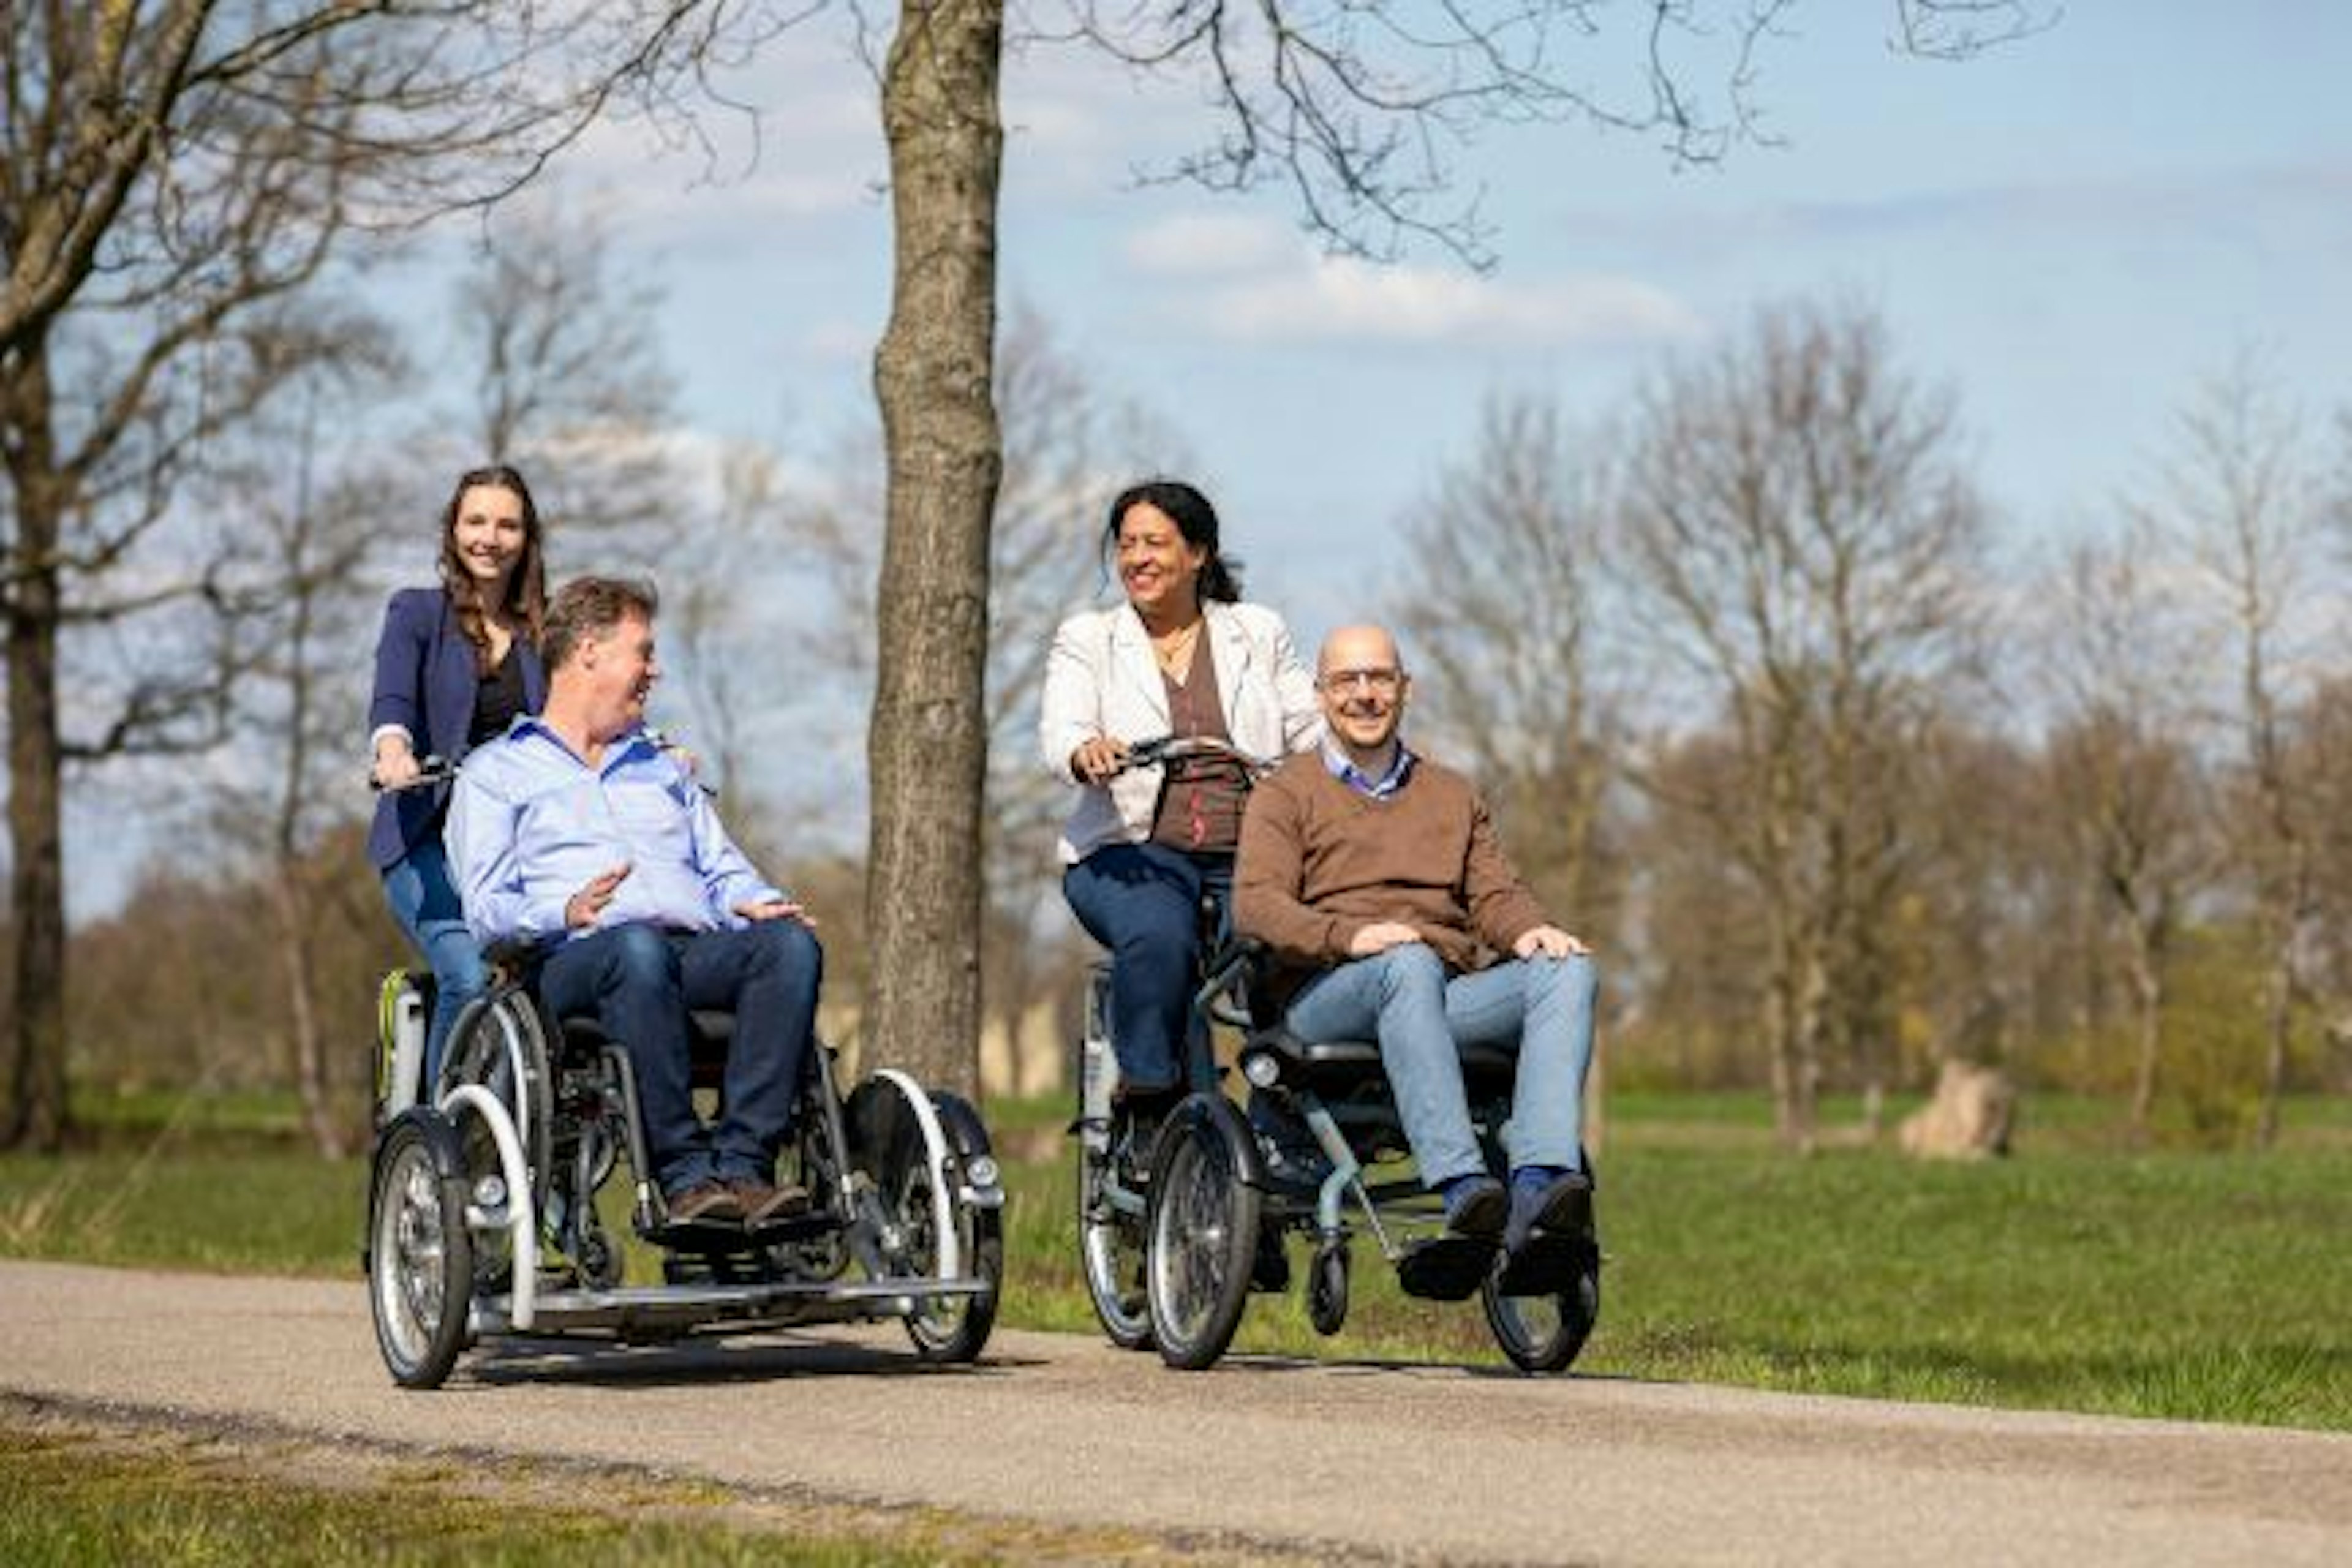 With three wheels for 2 persons wheelchair bicycles